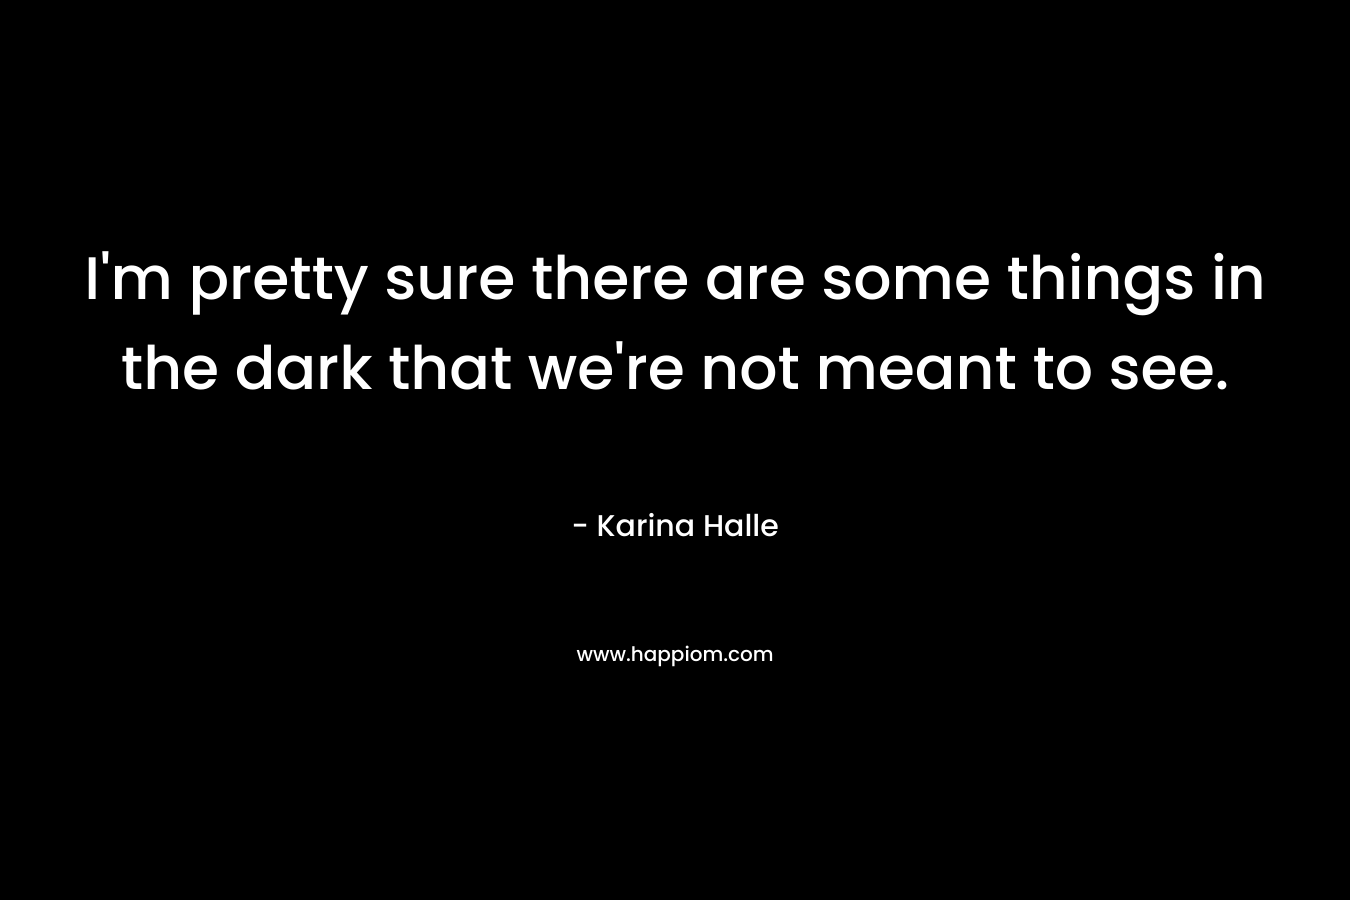 I'm pretty sure there are some things in the dark that we're not meant to see.